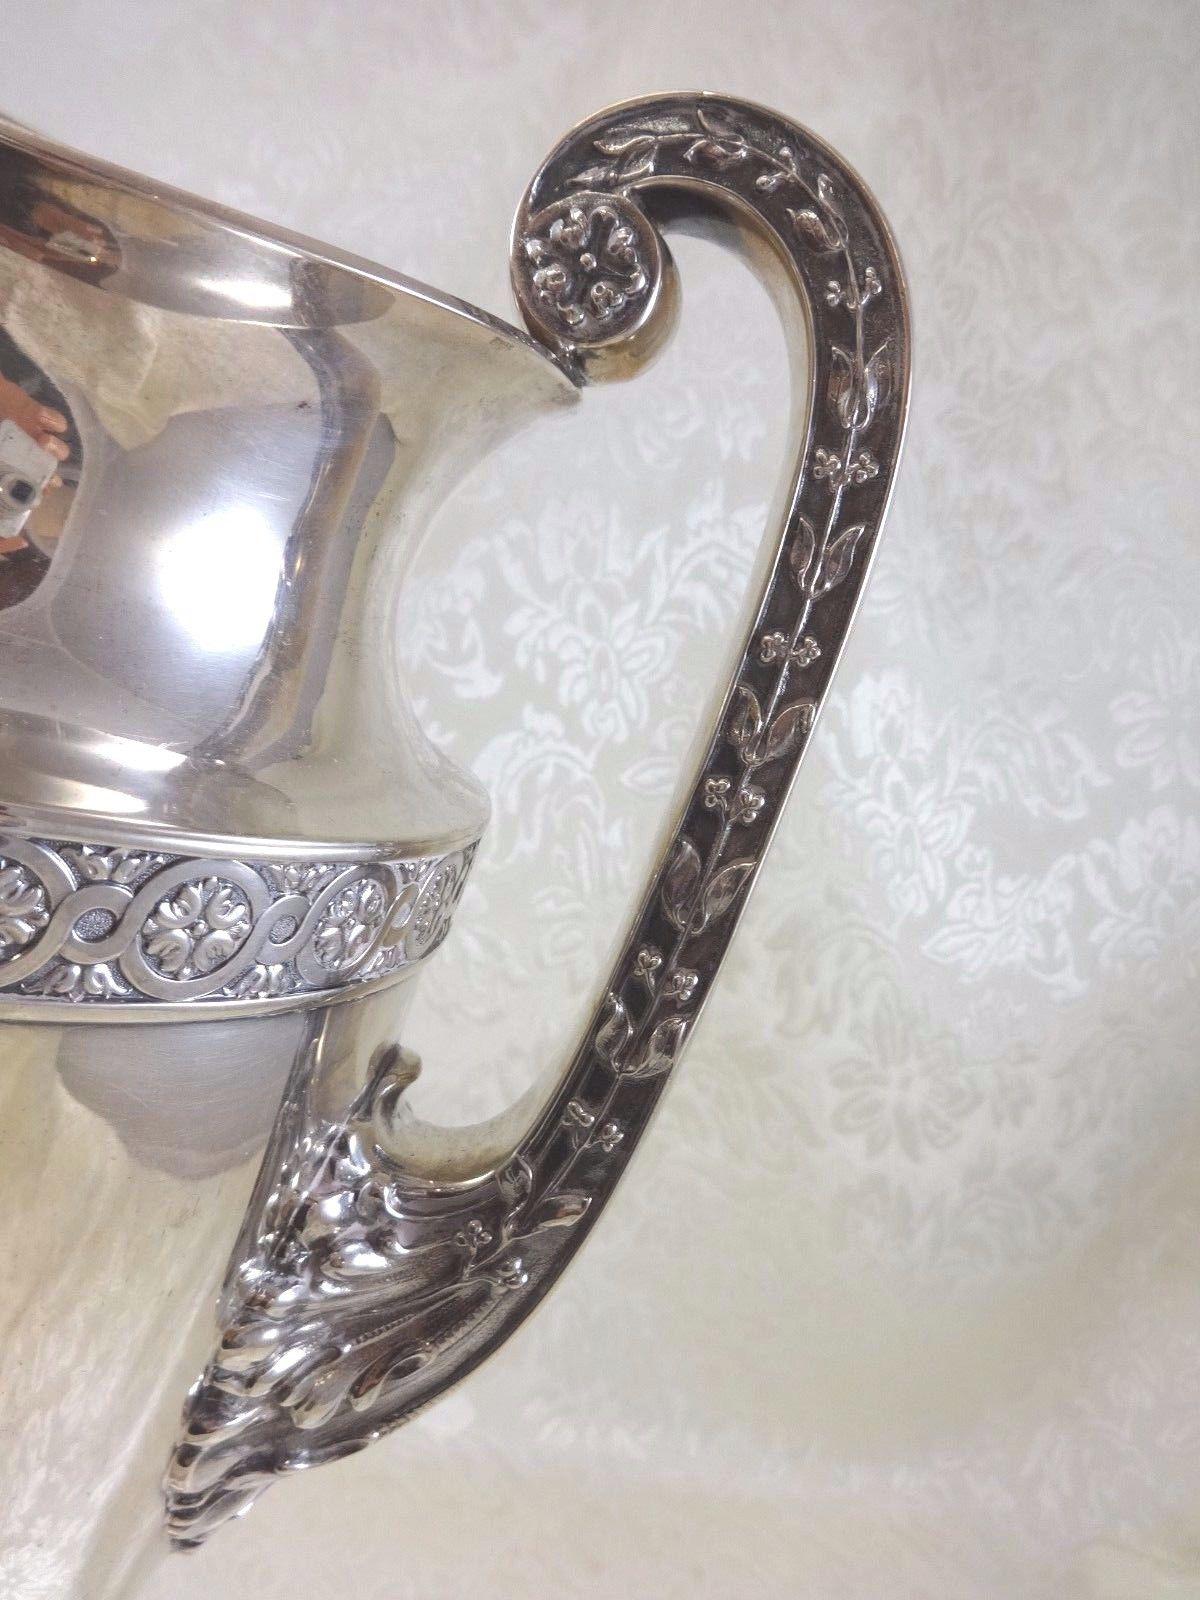 Gorham
Exceptional Gorham Grecian style monumental sterling silver water pitcher 15 tall x 9 wide and holds 6 1/2 pints. It bears the sword date mark, circa 1915. Weight - 53 troy ounces. It is monogrammed with a lovely vintage monogram PLB and is